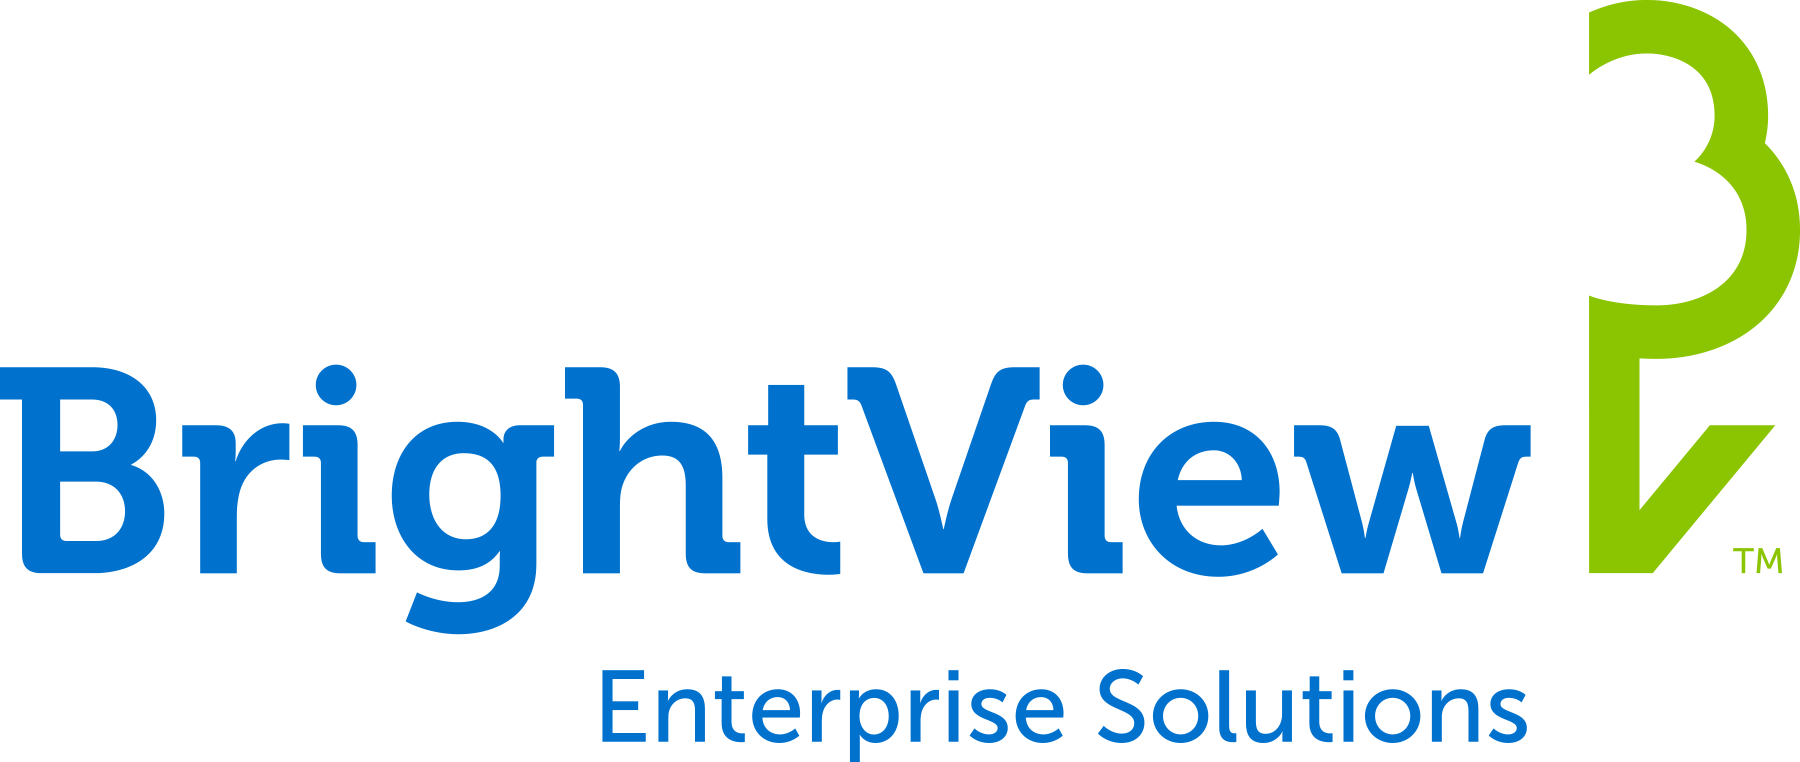 BrightView Enterprise Solutions Logo